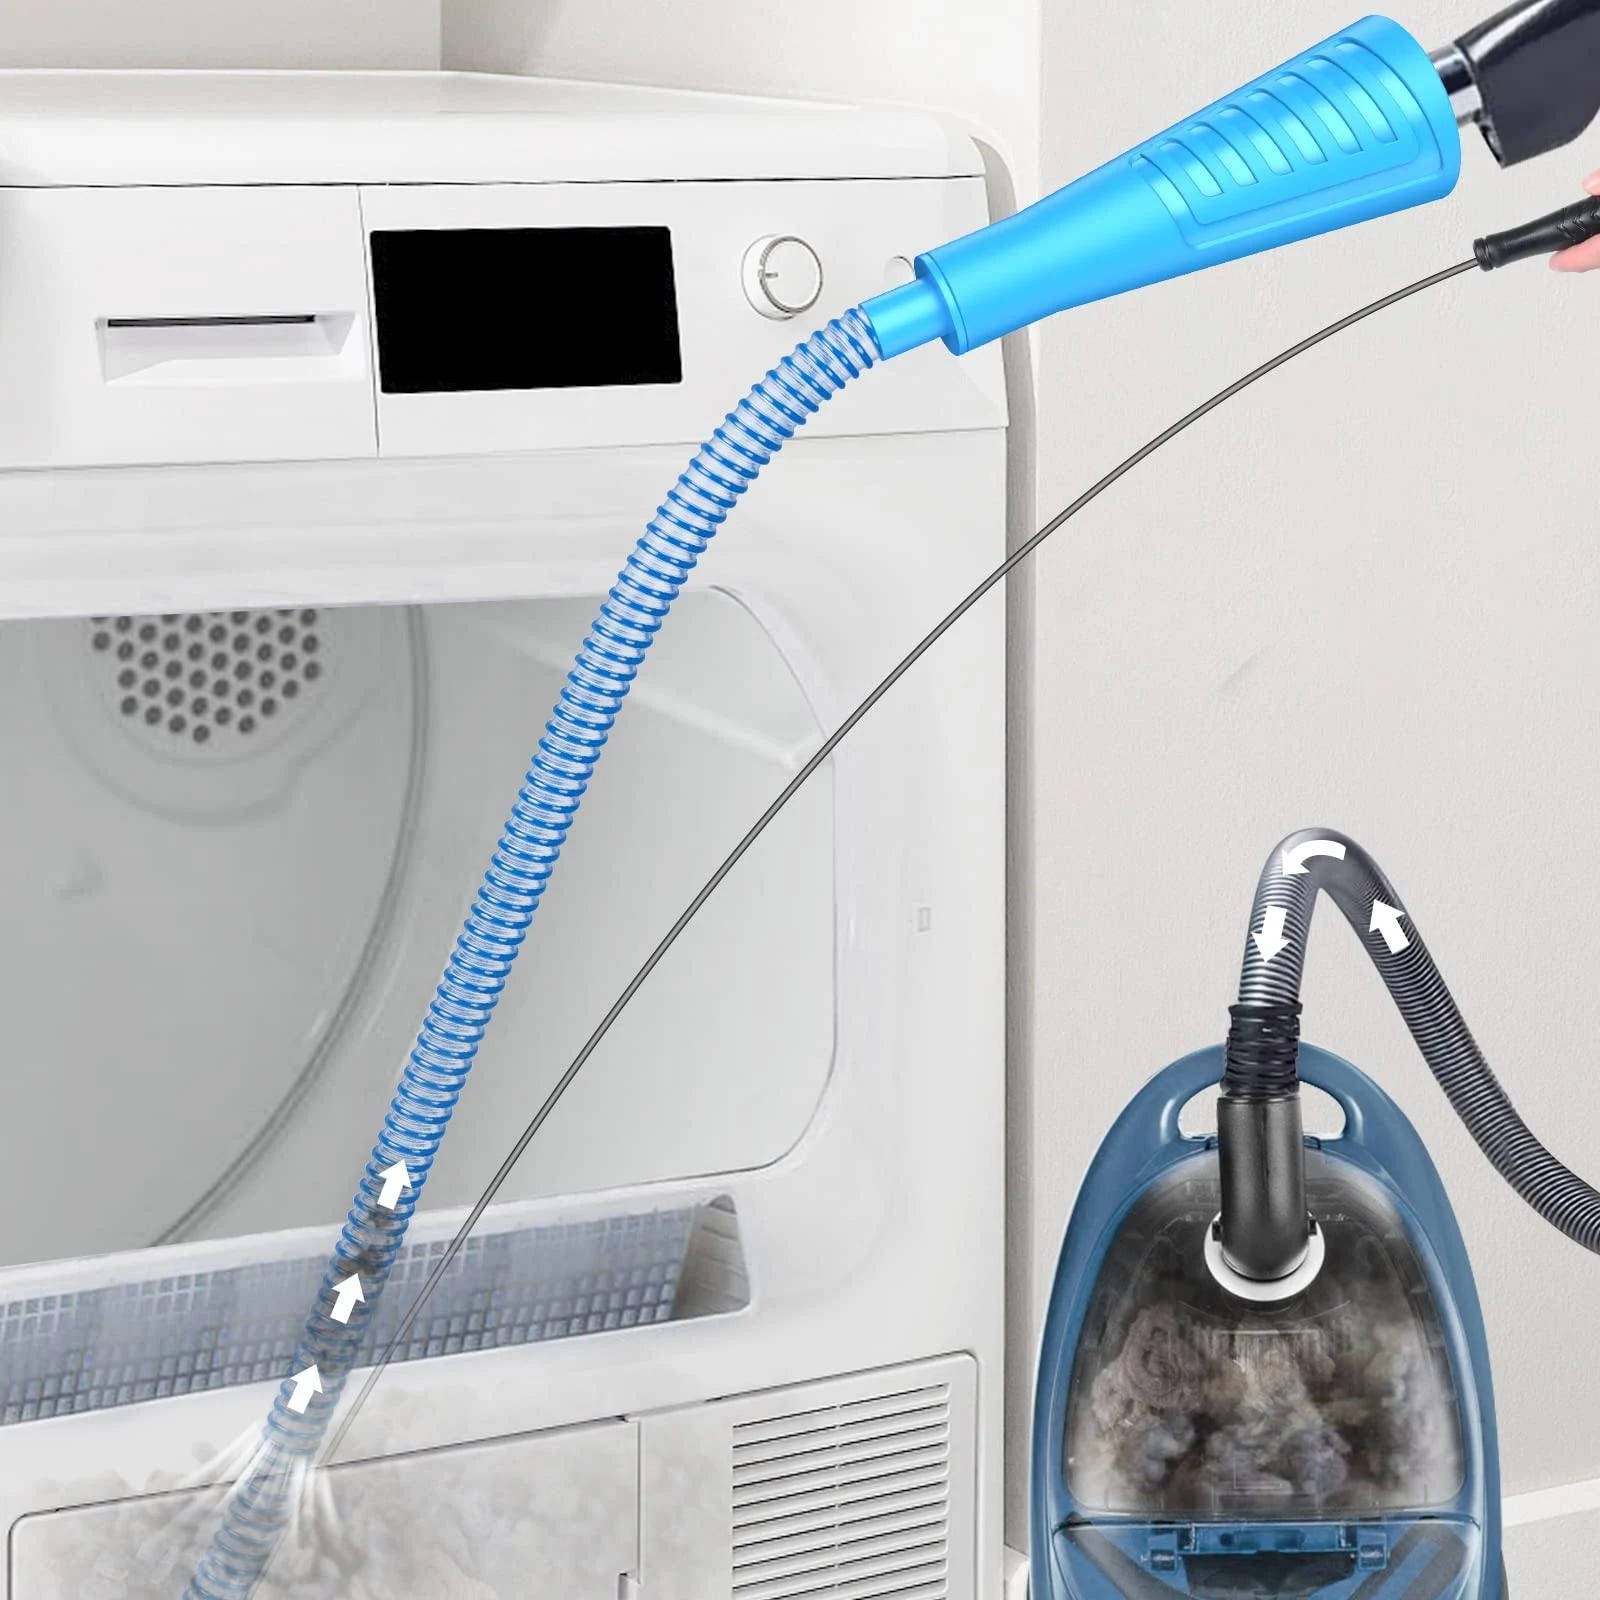 Sealegend Dryer Vent Cleaner: Prevent Fires and Make Cleaning Easy | Image